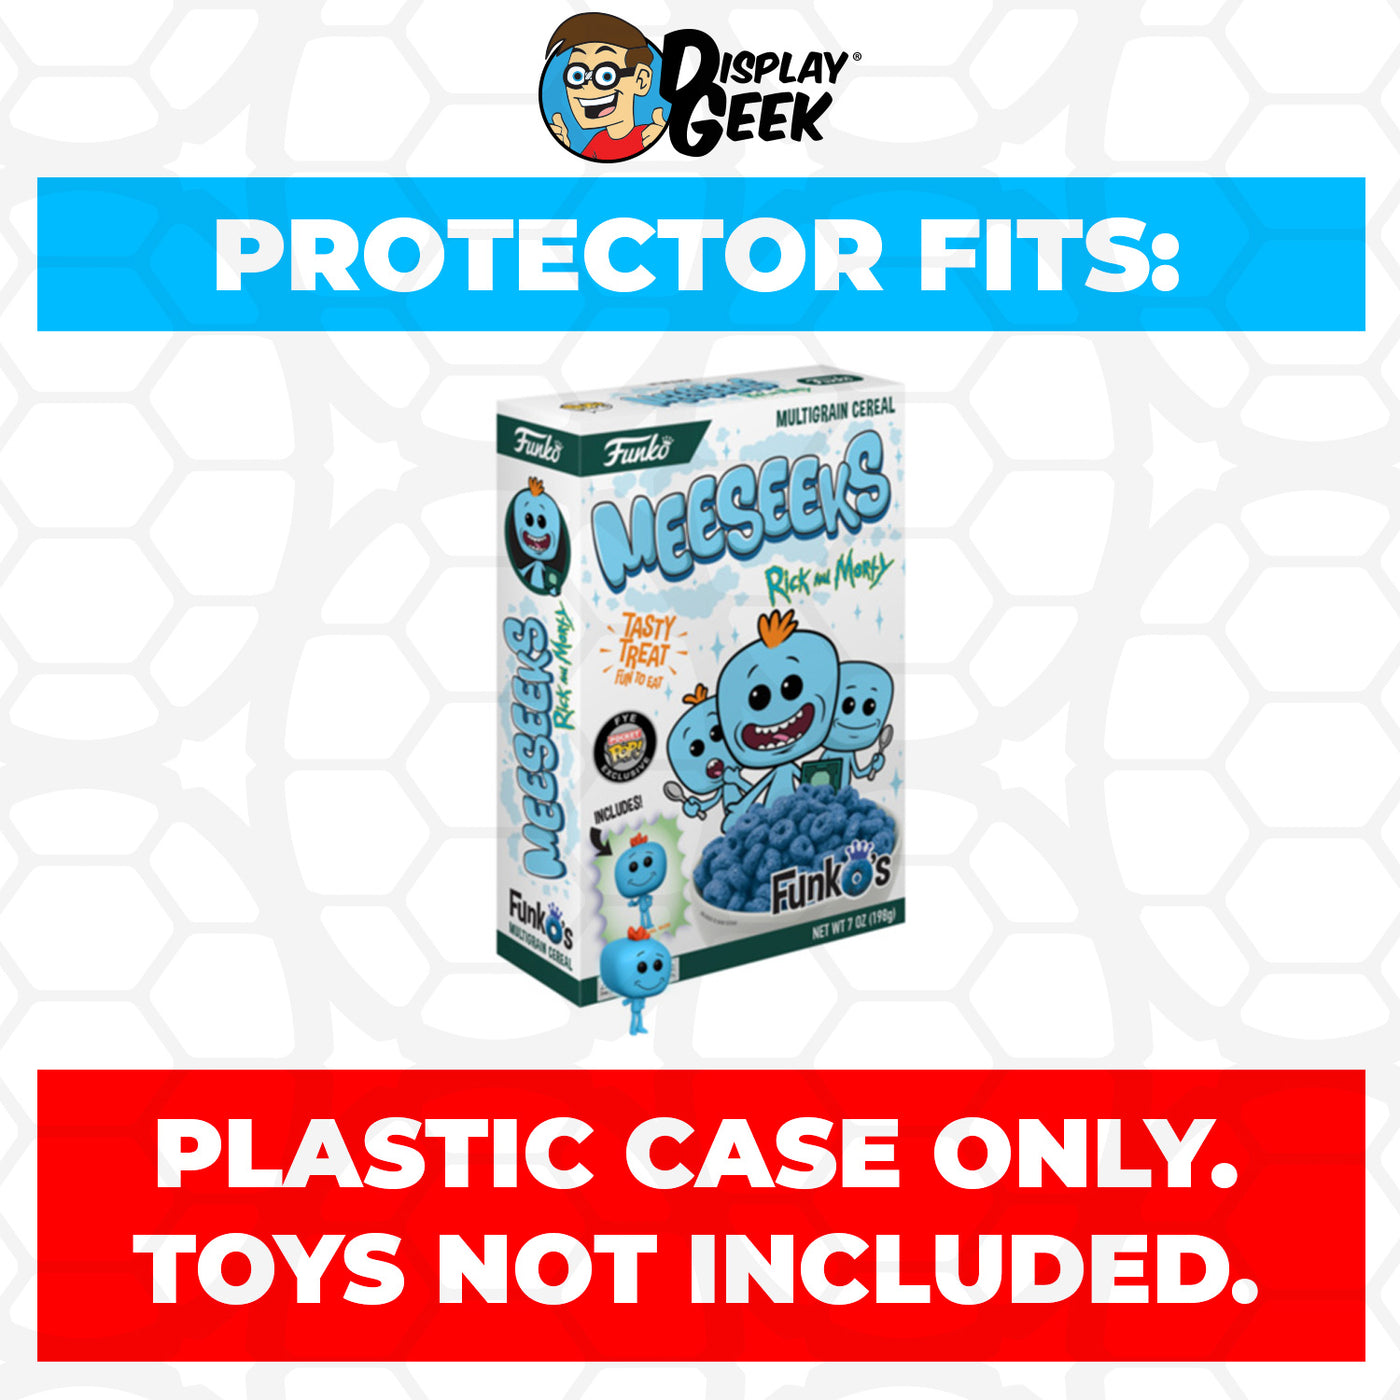 Pop Protector for Mr. Meeseeks FunkO's Cereal Box on The Protector Guide App by Display Geek